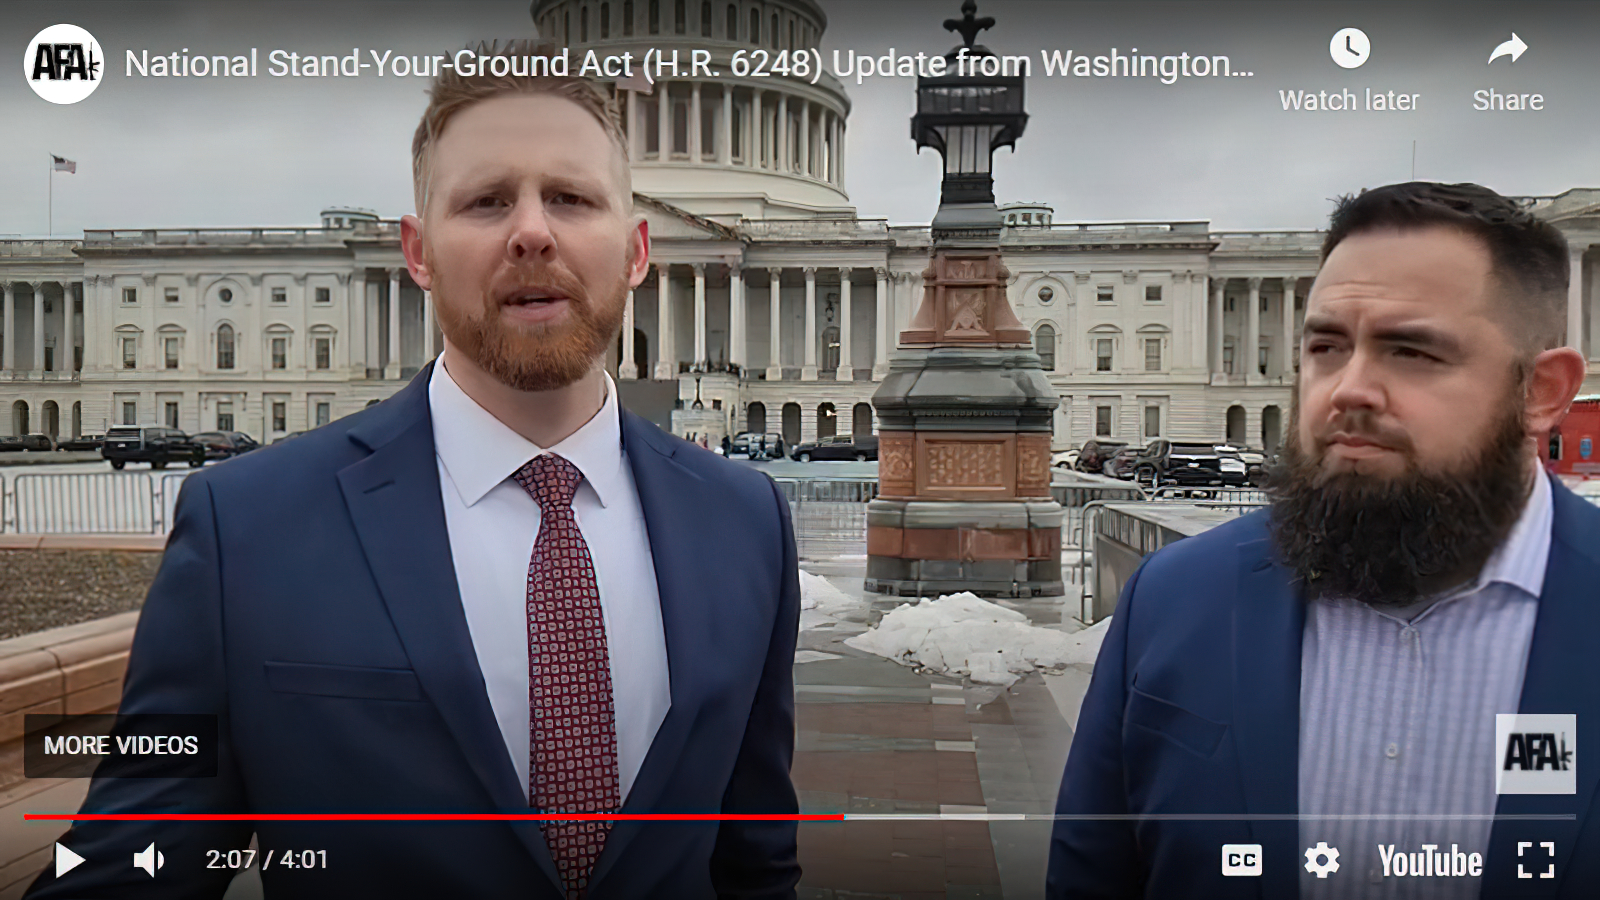 National Stand-Your-Ground Act (H.R. 6248) - American Firearms Association